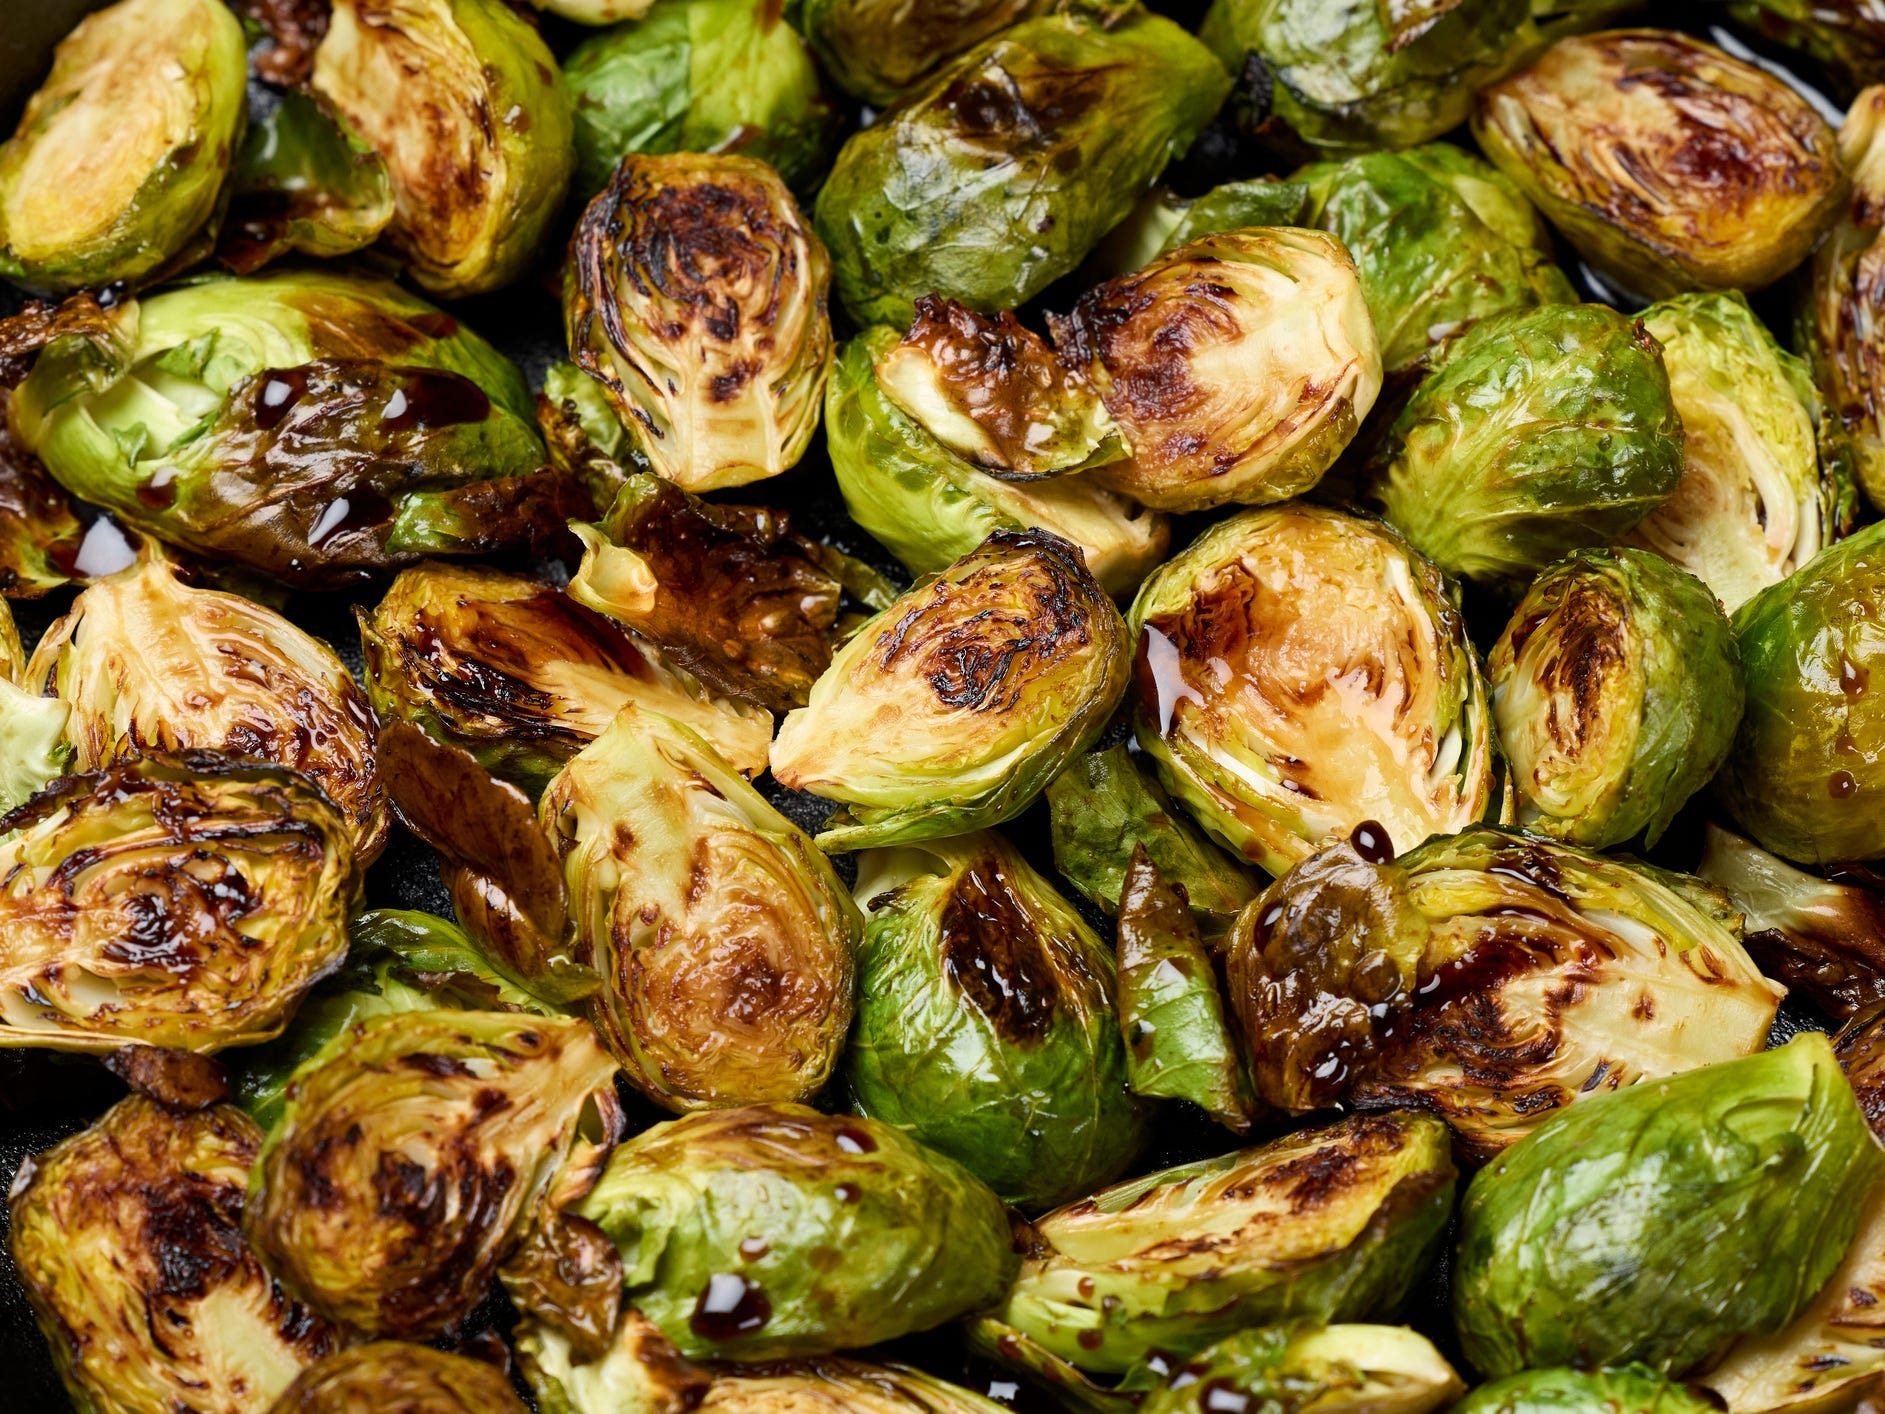 Many roasted and glazed brussels sprouts